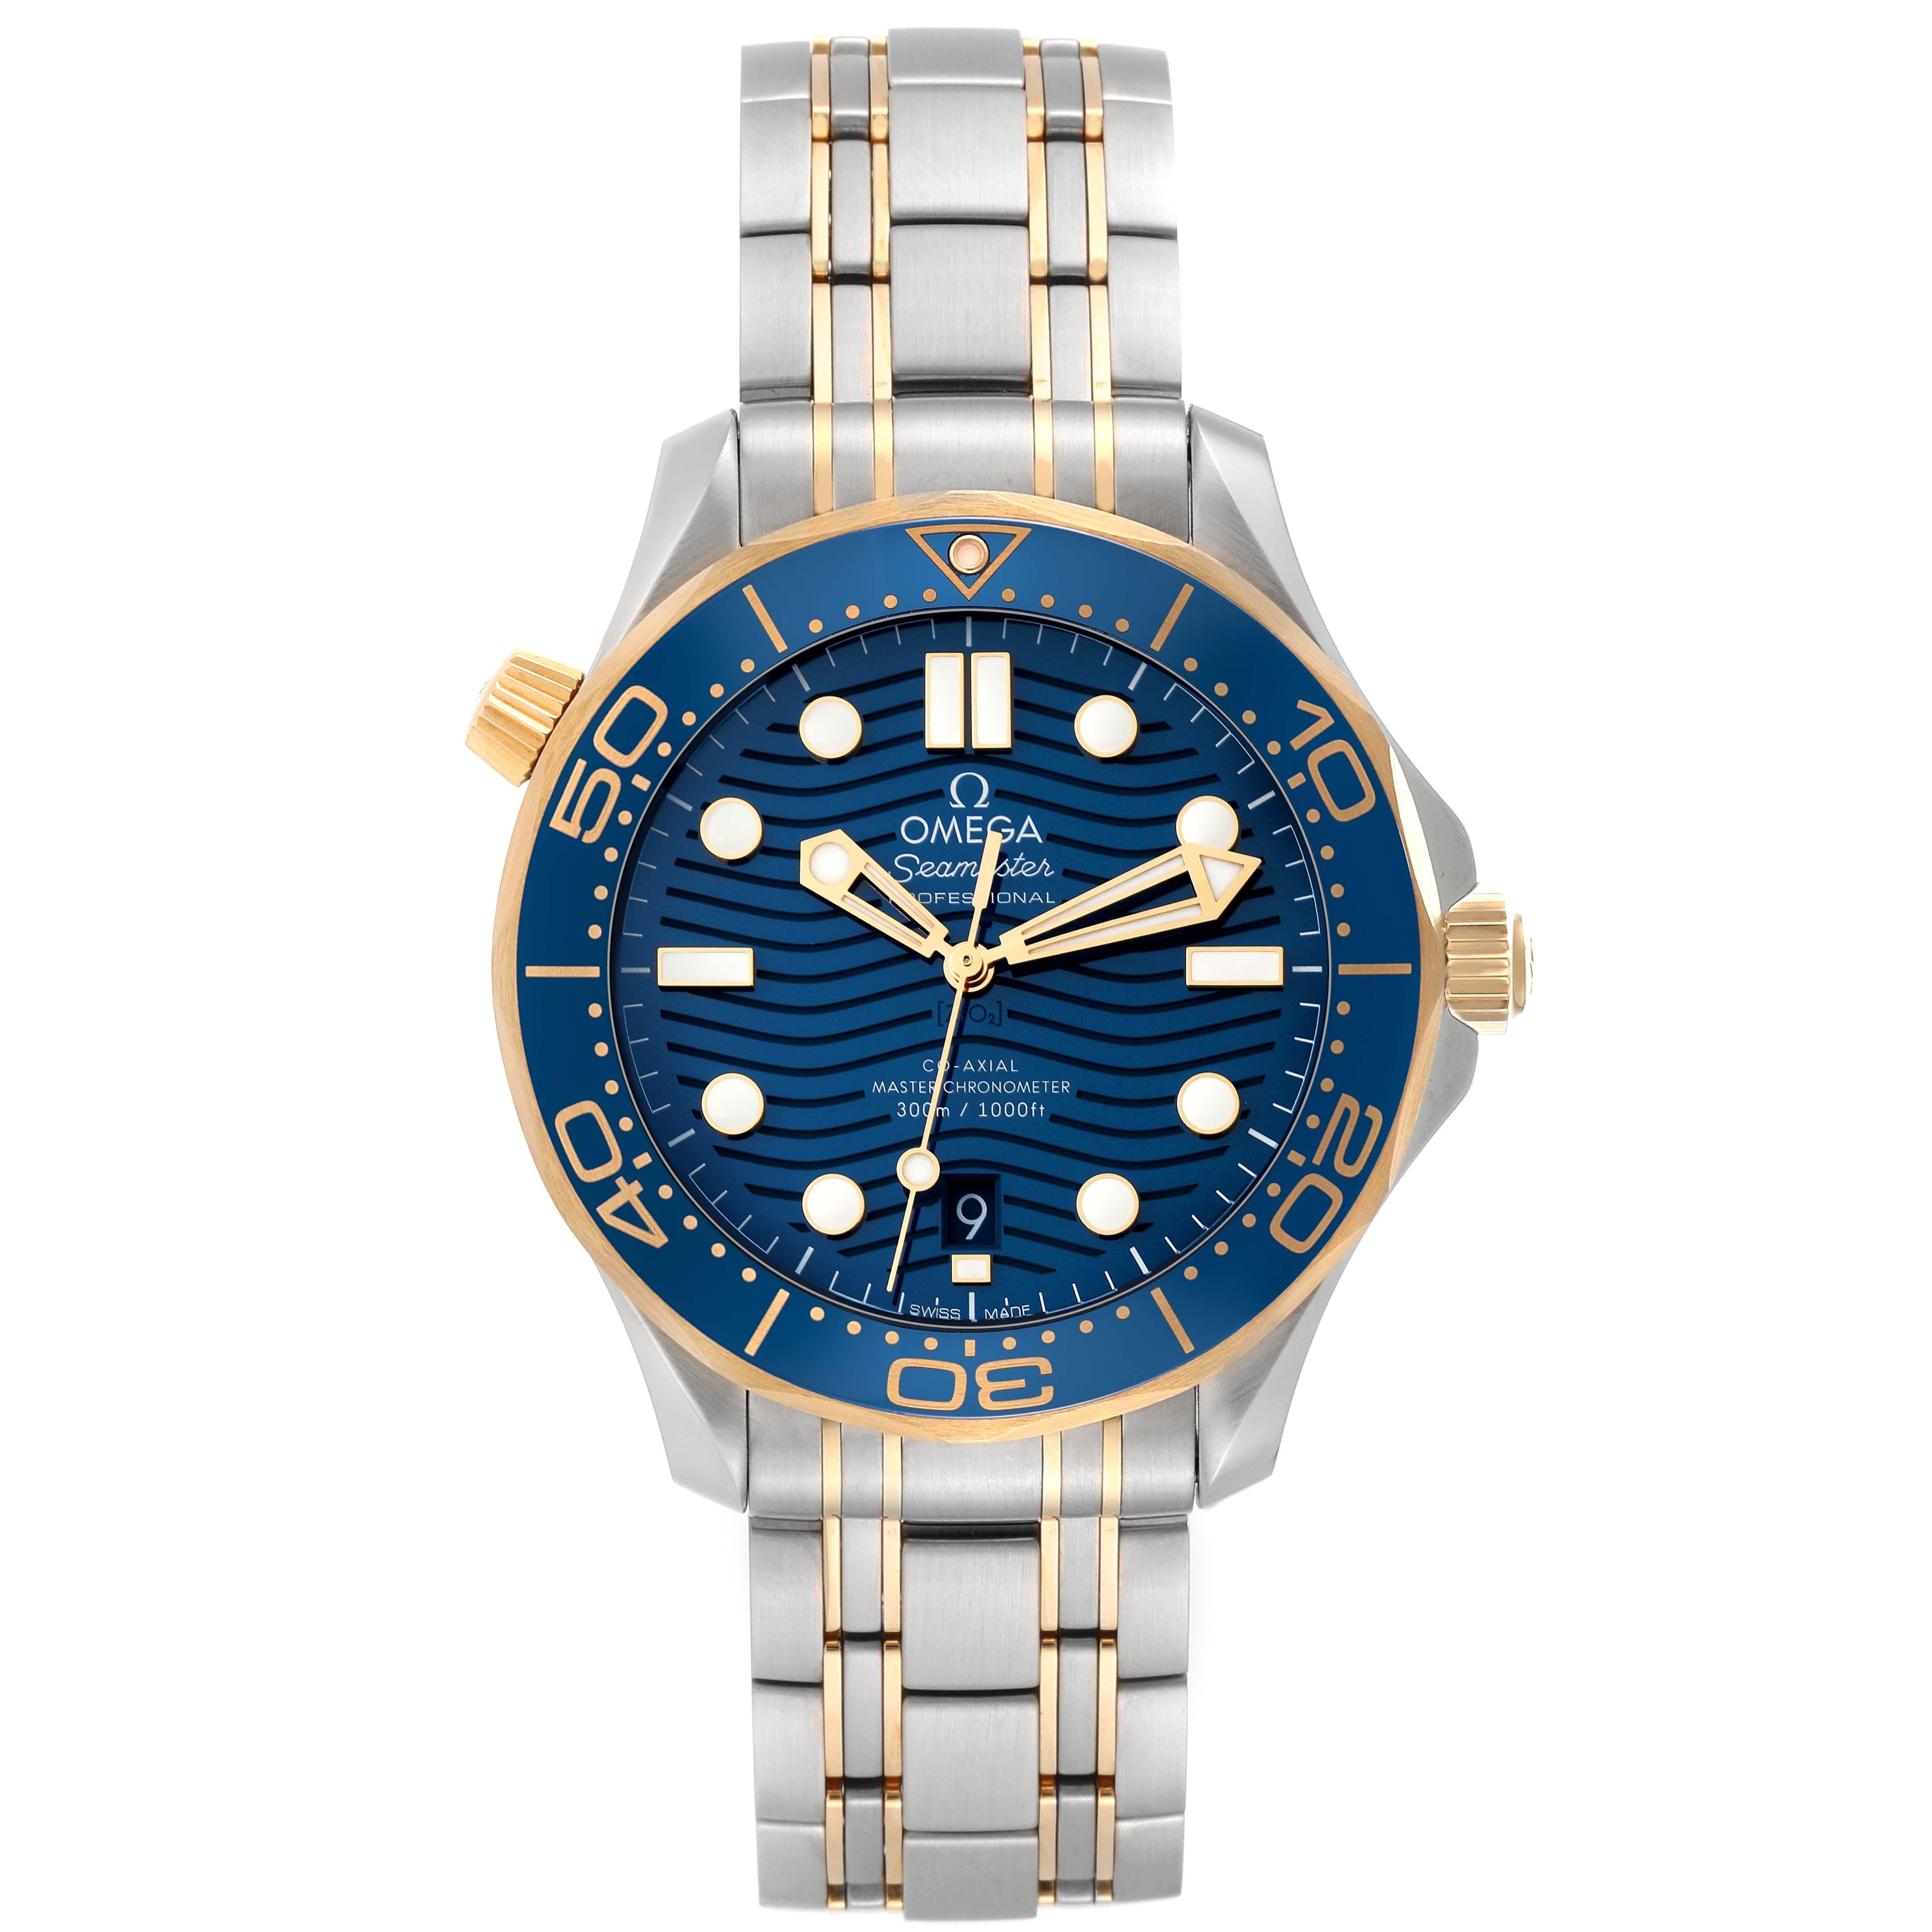 Omega Seamaster Diver 300M Steel Yellow Gold Mens Watch 210.20.42.20.03.001 Unworn. Self-winding movement with Co-Axial escapement. Certified Master Chronometer, approved by METAS, resistant to magnetic fields reaching 15,000 gauss. Free